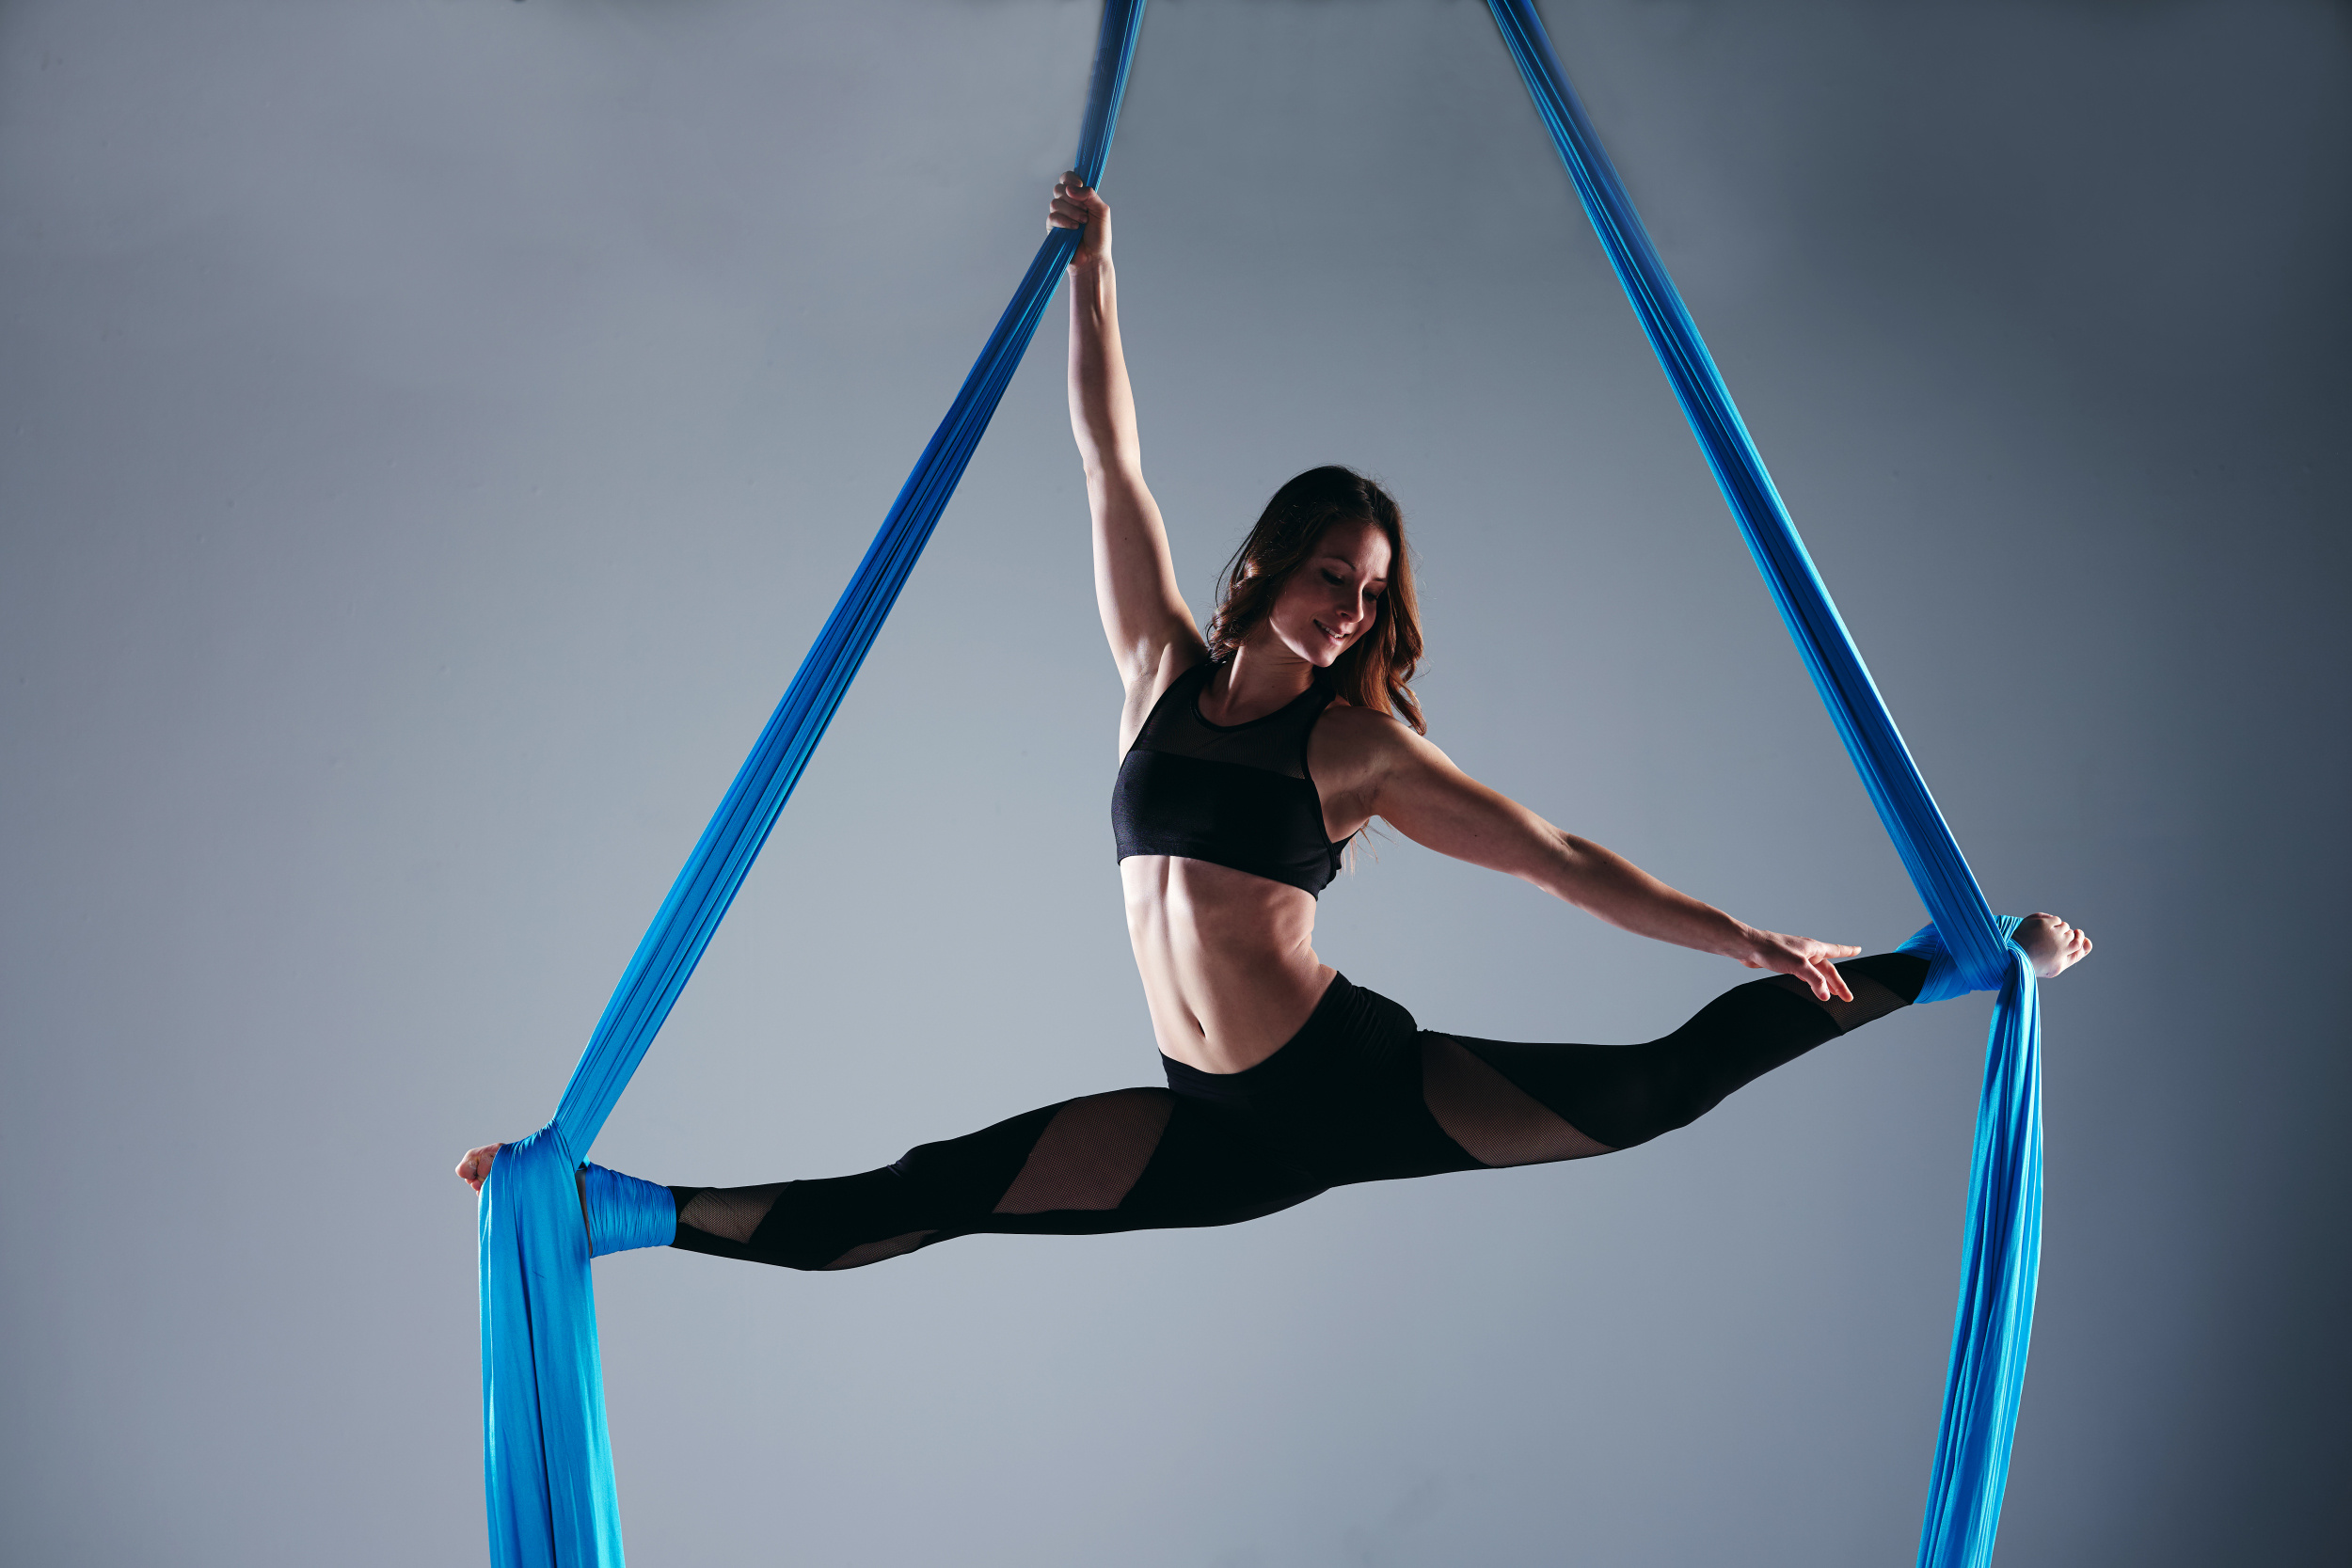 Aerial Silks: A gymnast performs leg-split while hanging from a fabric. 2500x1670 HD Wallpaper.